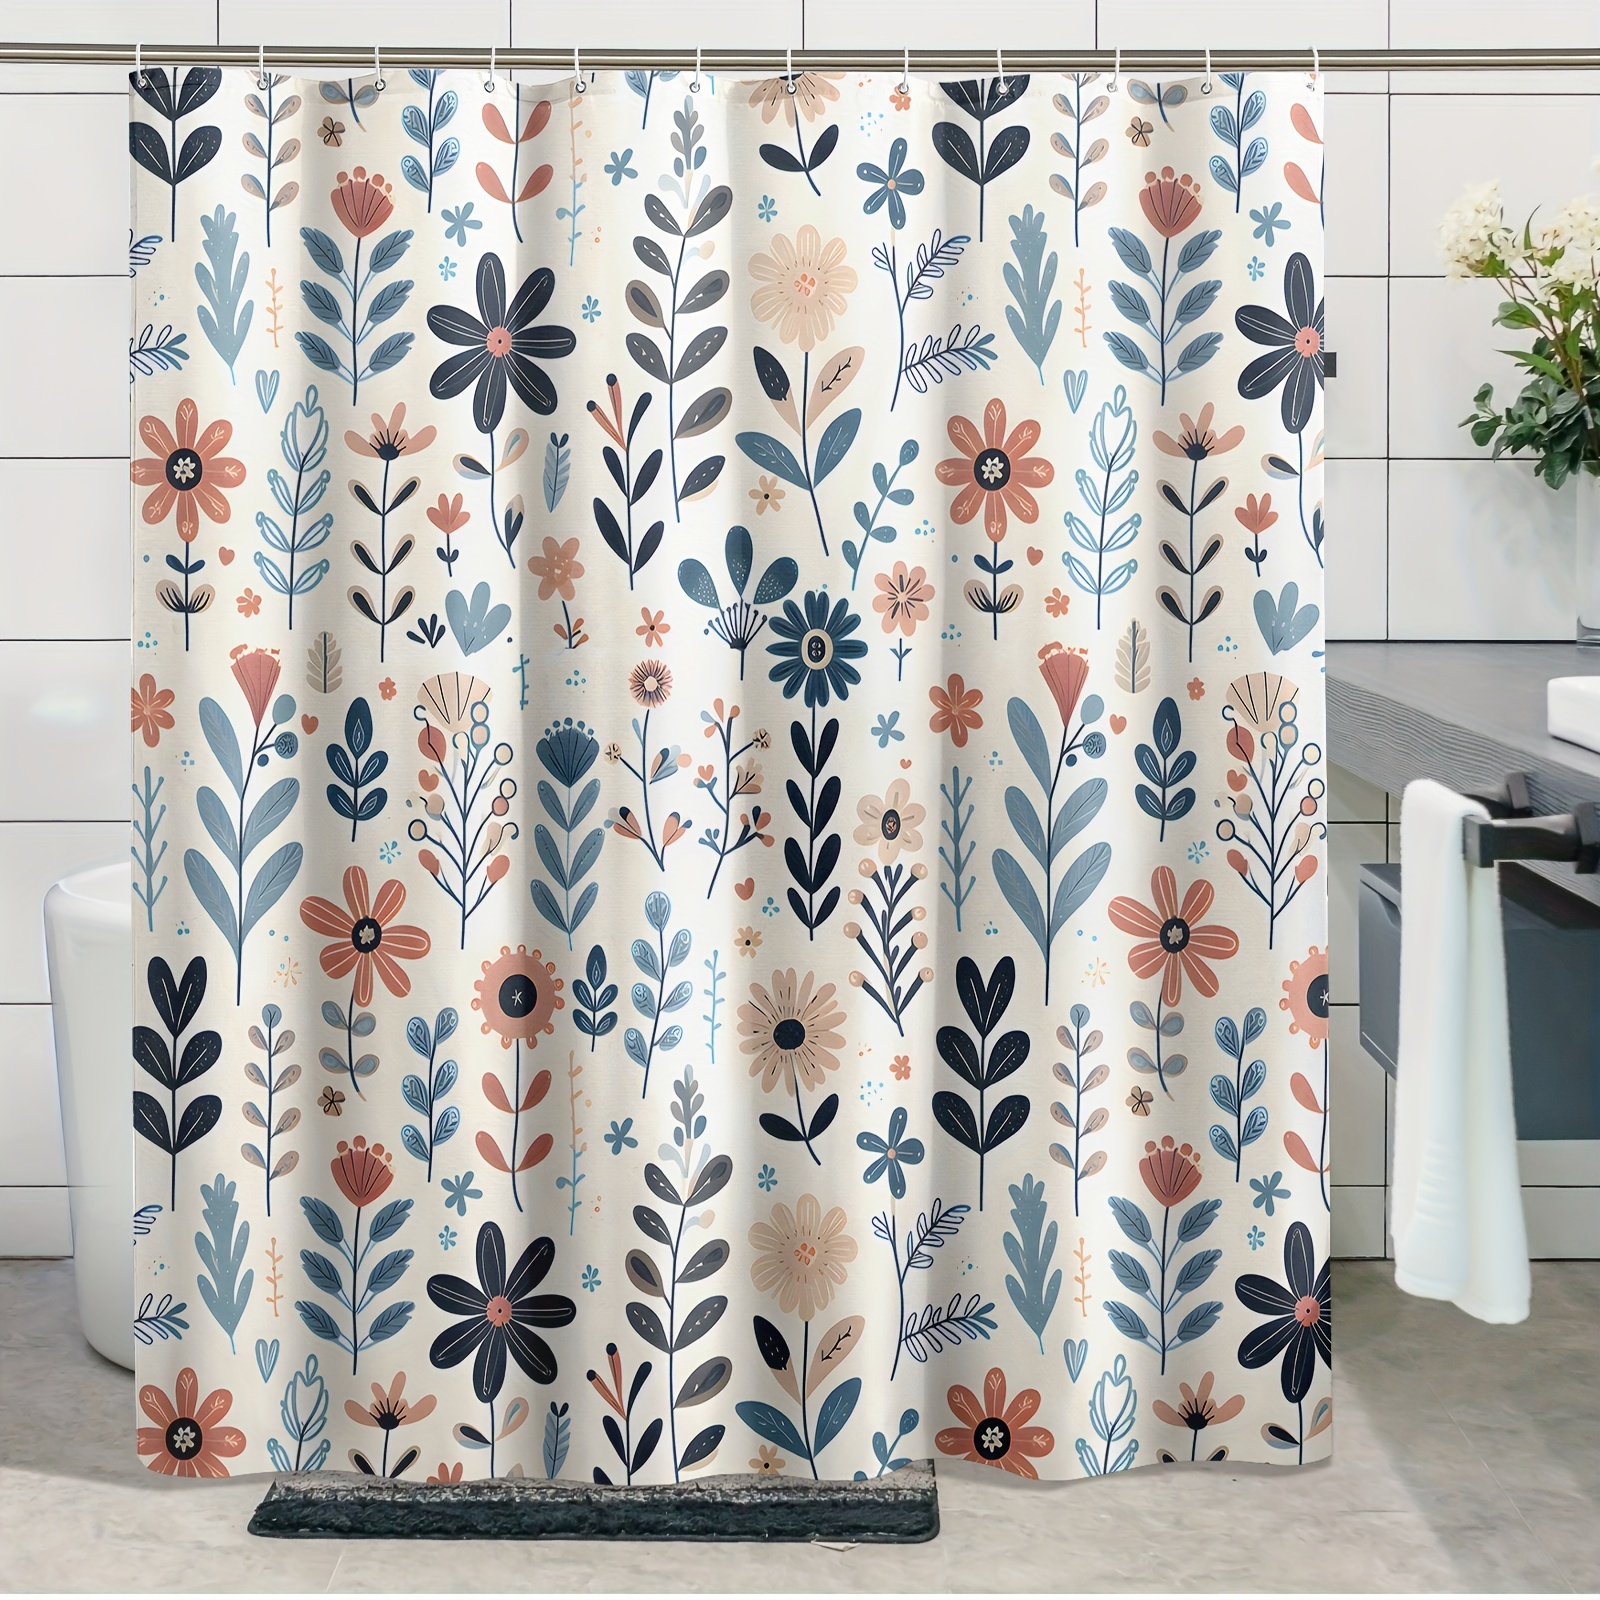 

Floral Polyester Shower Curtain, Water-resistant Pastoral Design, Machine Washable, Includes Hooks, Woven Farmhouse Bathroom Decor, All-season Unlined Fabric, Rustic Wildflower Pattern - 1pc 71x71